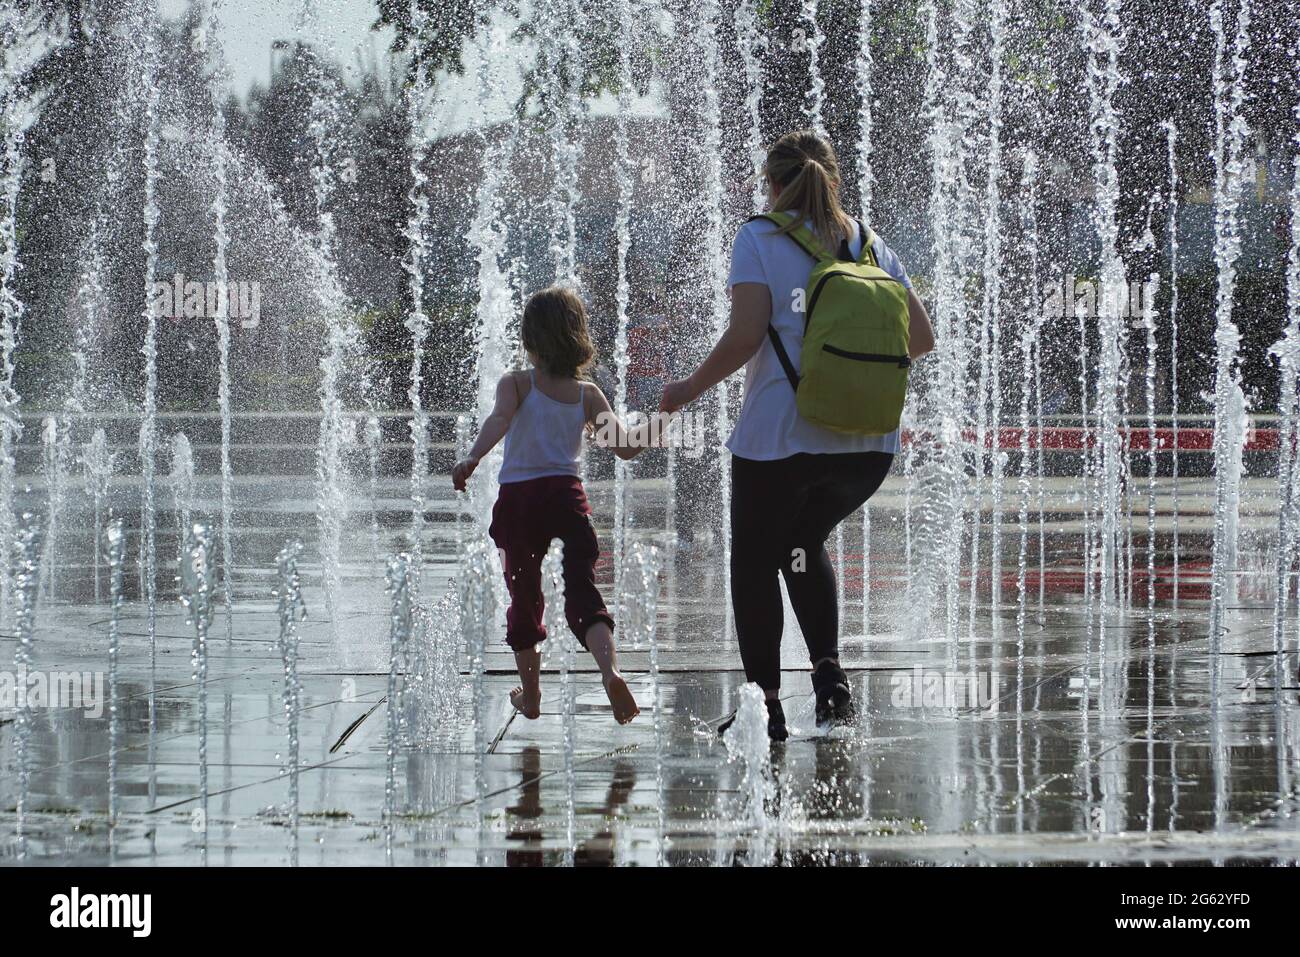 Mother and her daughter cool off in the park under water sprinklers set up to beat the oppressive summer heat in Istanbul, Turkey Stock Photo